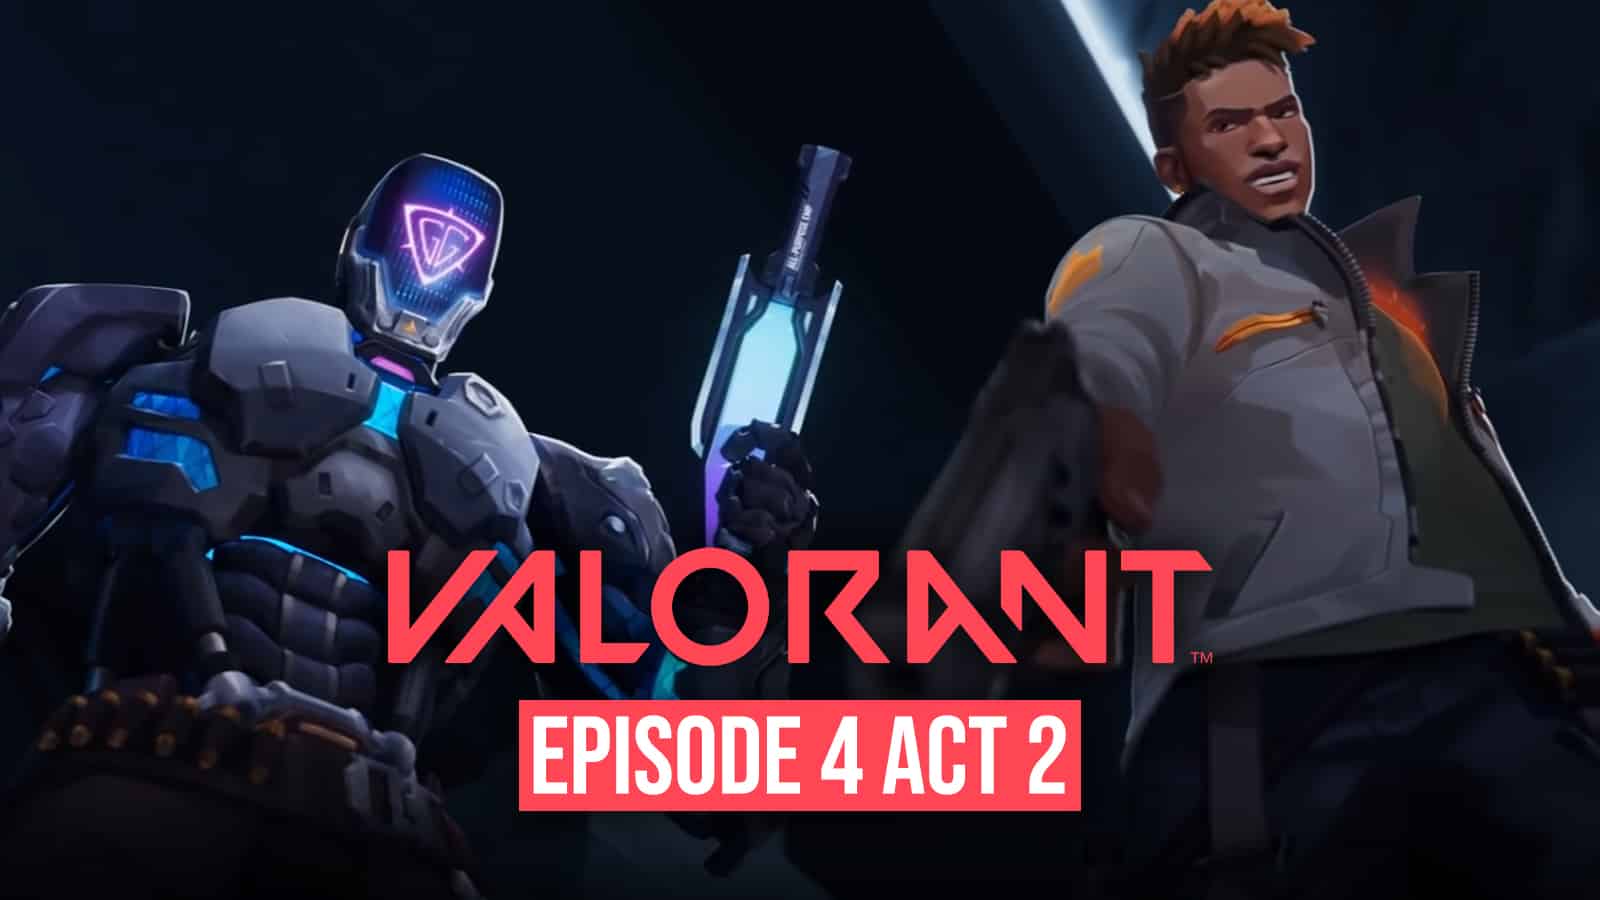 Valorant Episode 4 Act 2, Launched on March 1